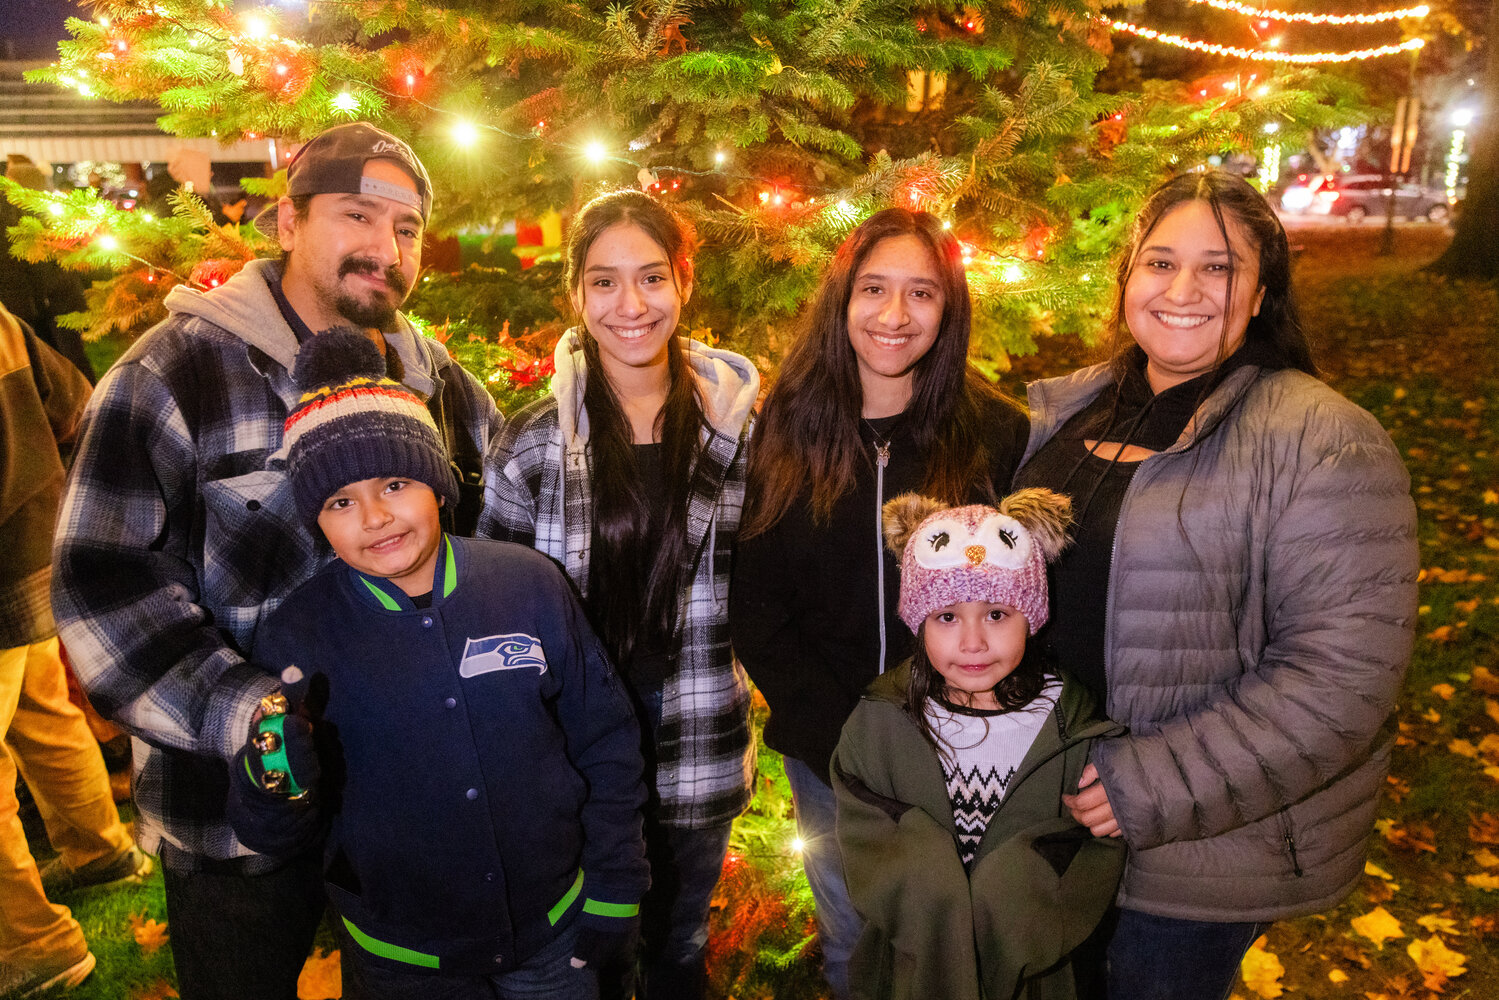 The Vasquez family smiles for a photo in front of a lit Christmas tree at George Washington Park in Centralia on Friday, Nov. 24.